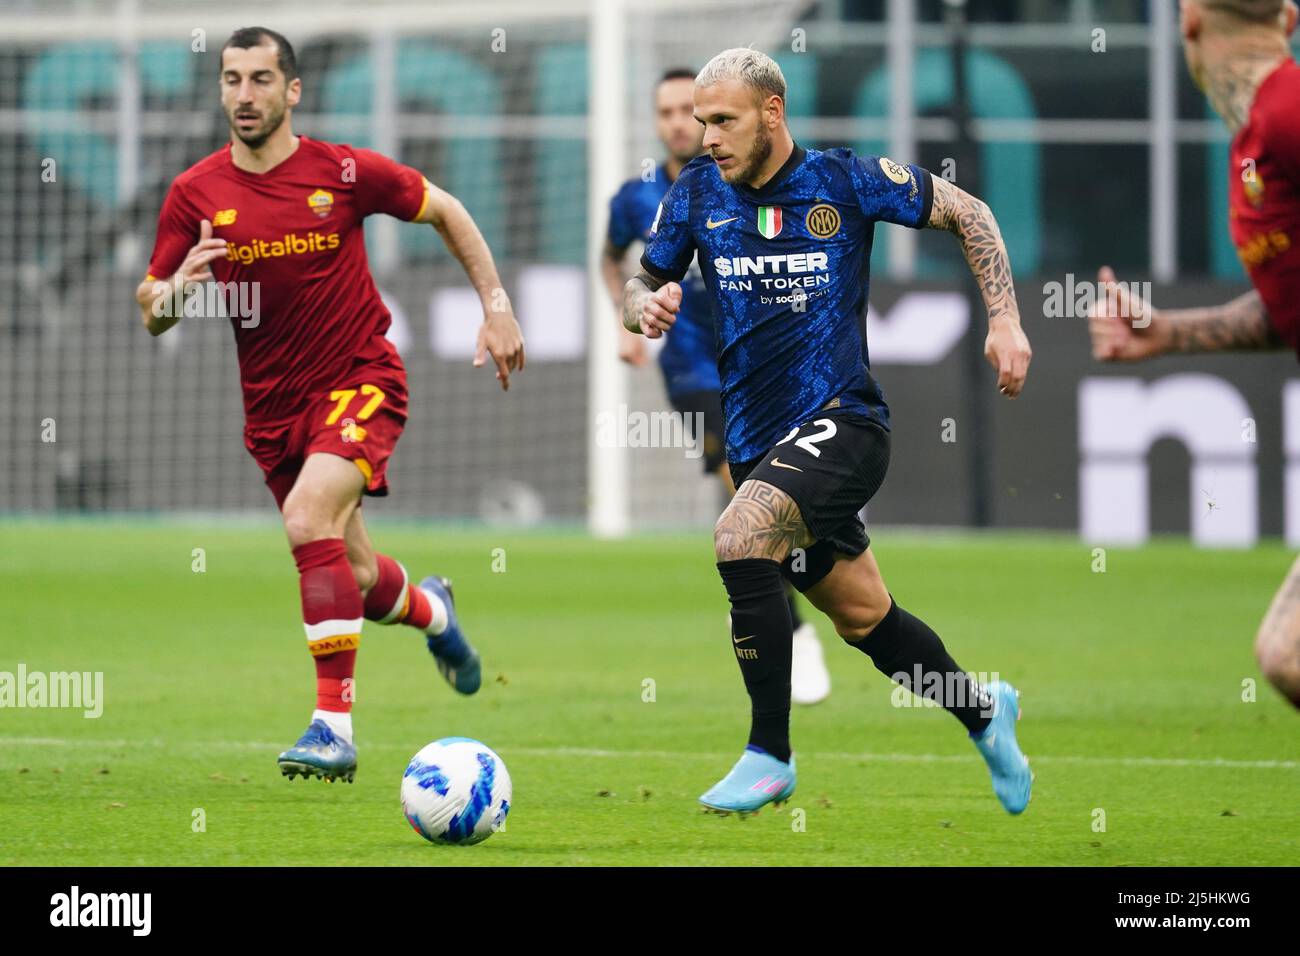 Federico Dimarco Fc Inter During The Italian Soccer Serie A Match Inter Fc Internazionale Vs As Roma On April 23 22 At The San Siro Stadium In Milan Italy Photo By